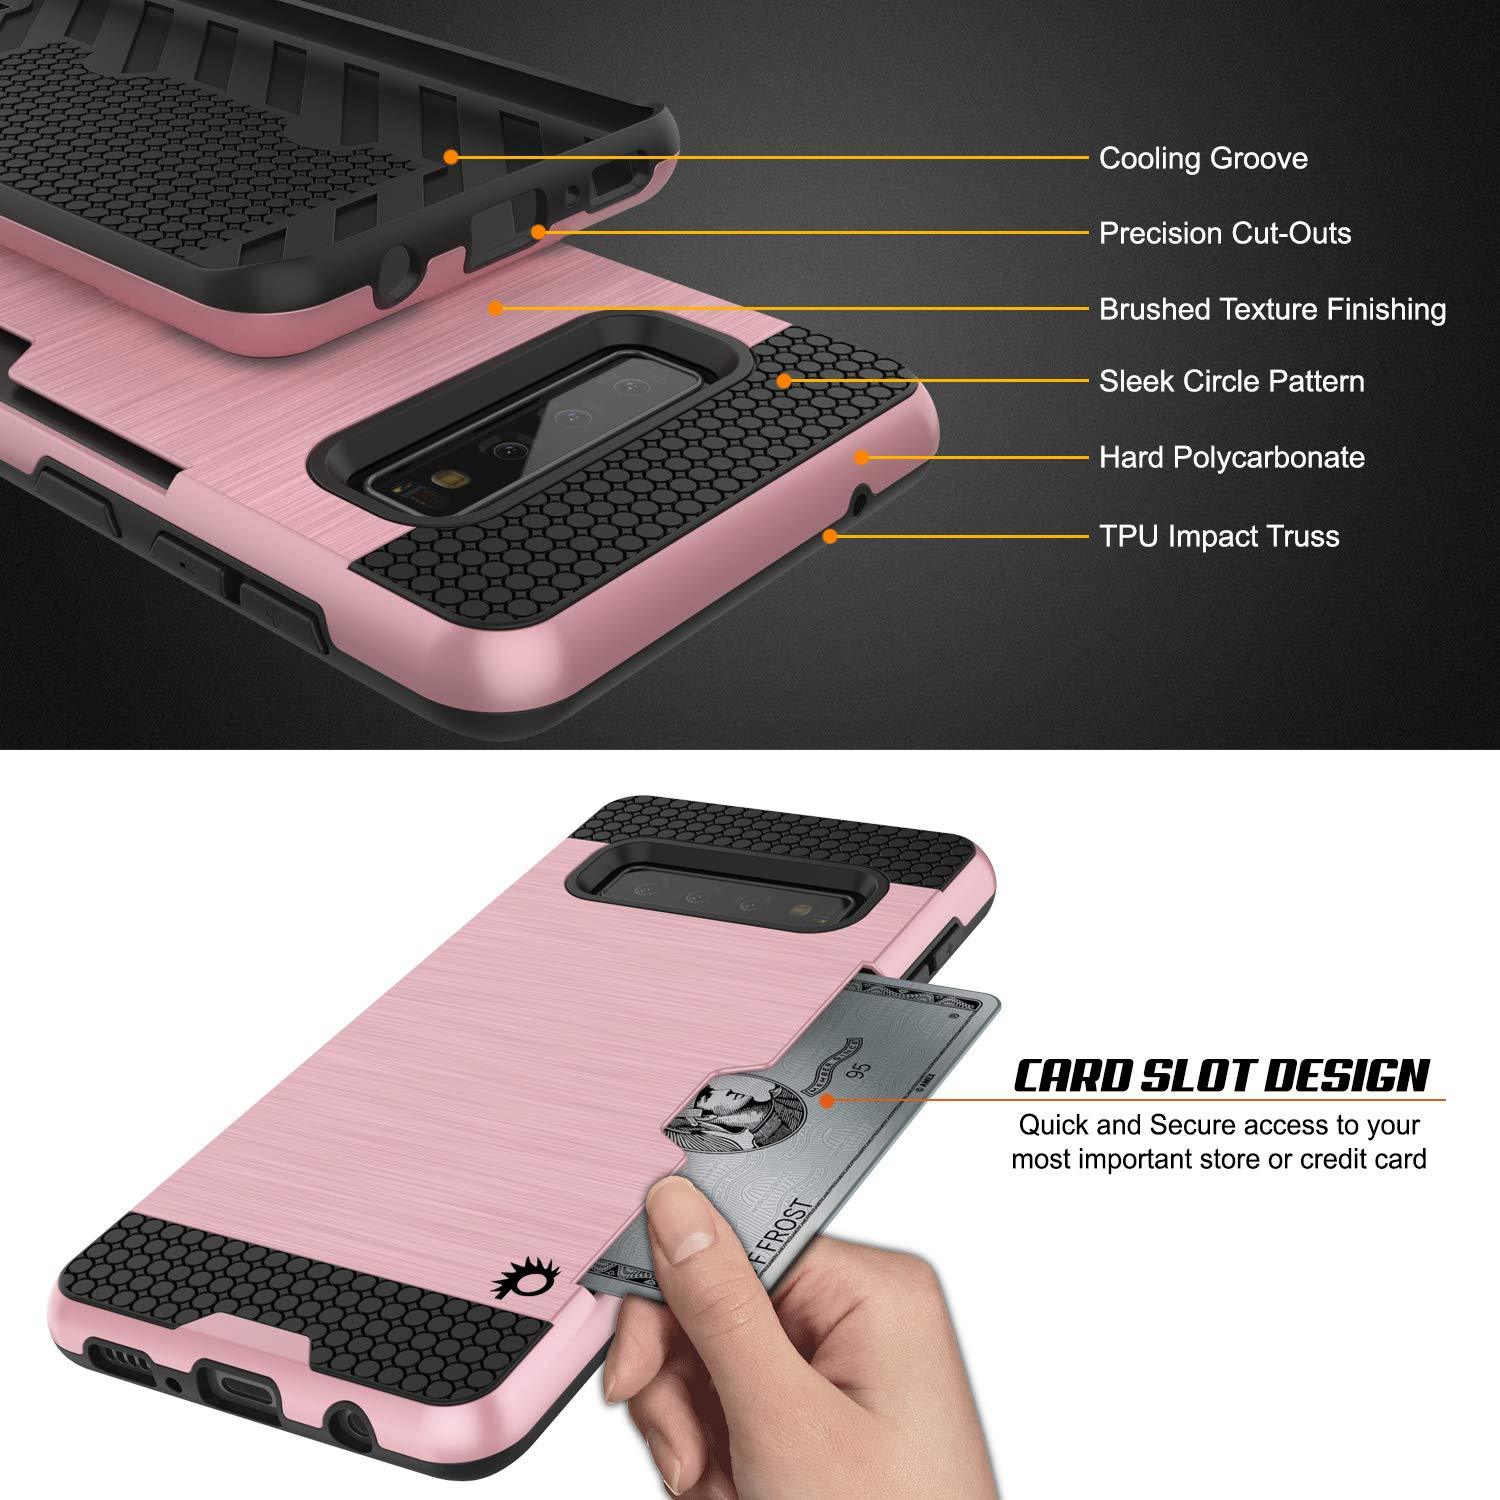 Galaxy S10 Case, PUNKcase [SLOT Series] [Slim Fit] Dual-Layer Armor Cover w/Integrated Anti-Shock System, Credit Card Slot [Rose Gold]